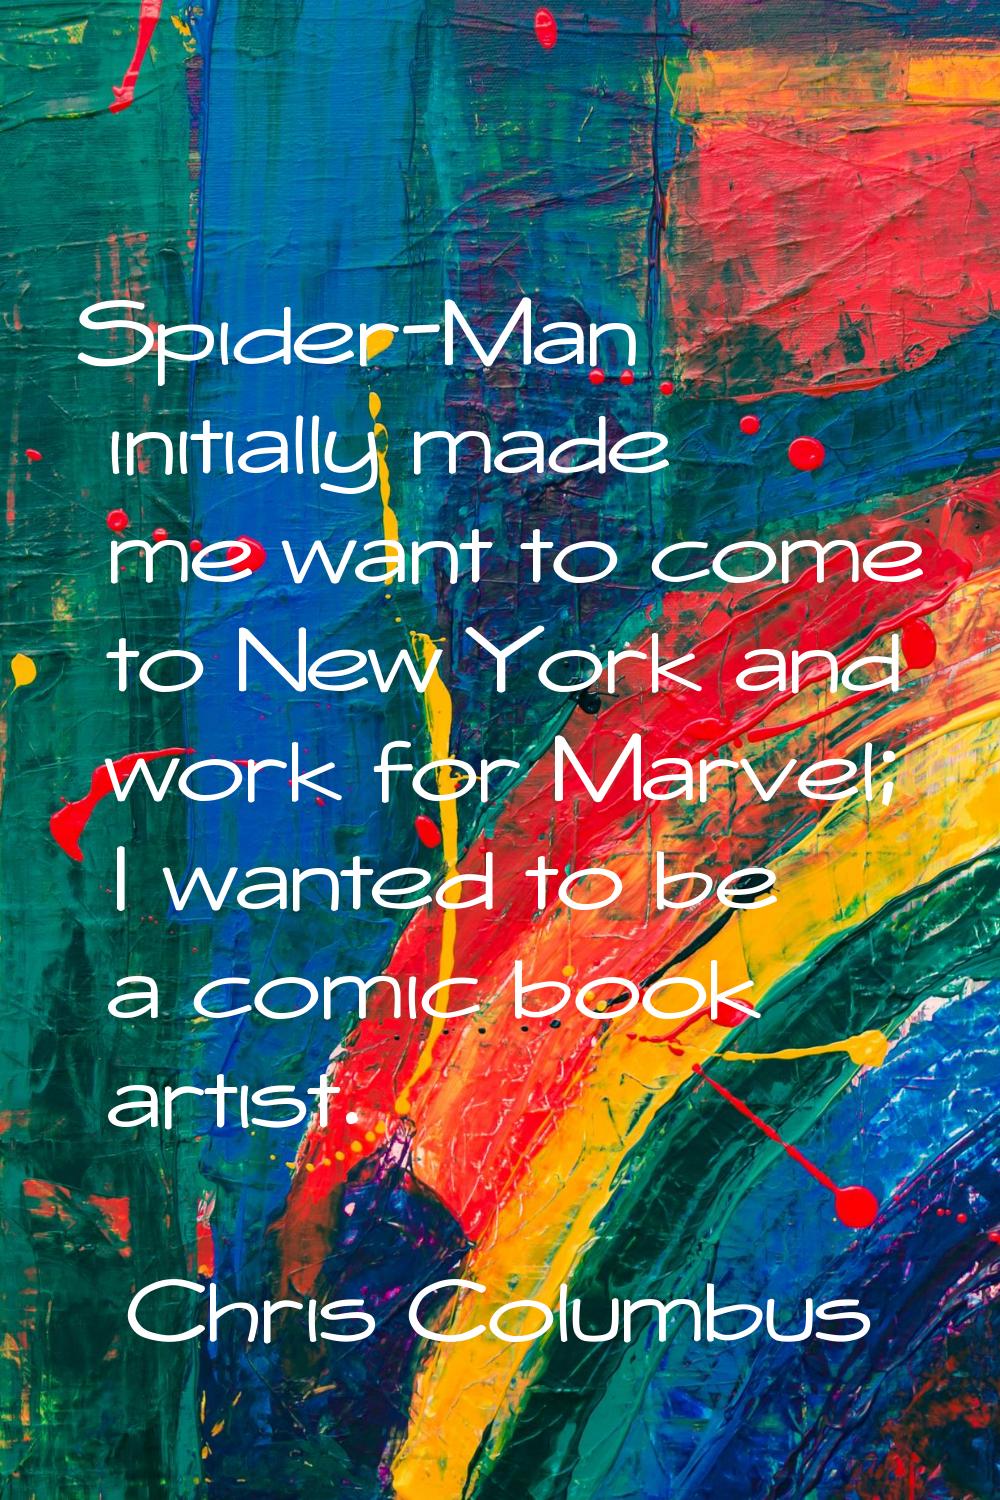 Spider-Man initially made me want to come to New York and work for Marvel; I wanted to be a comic b